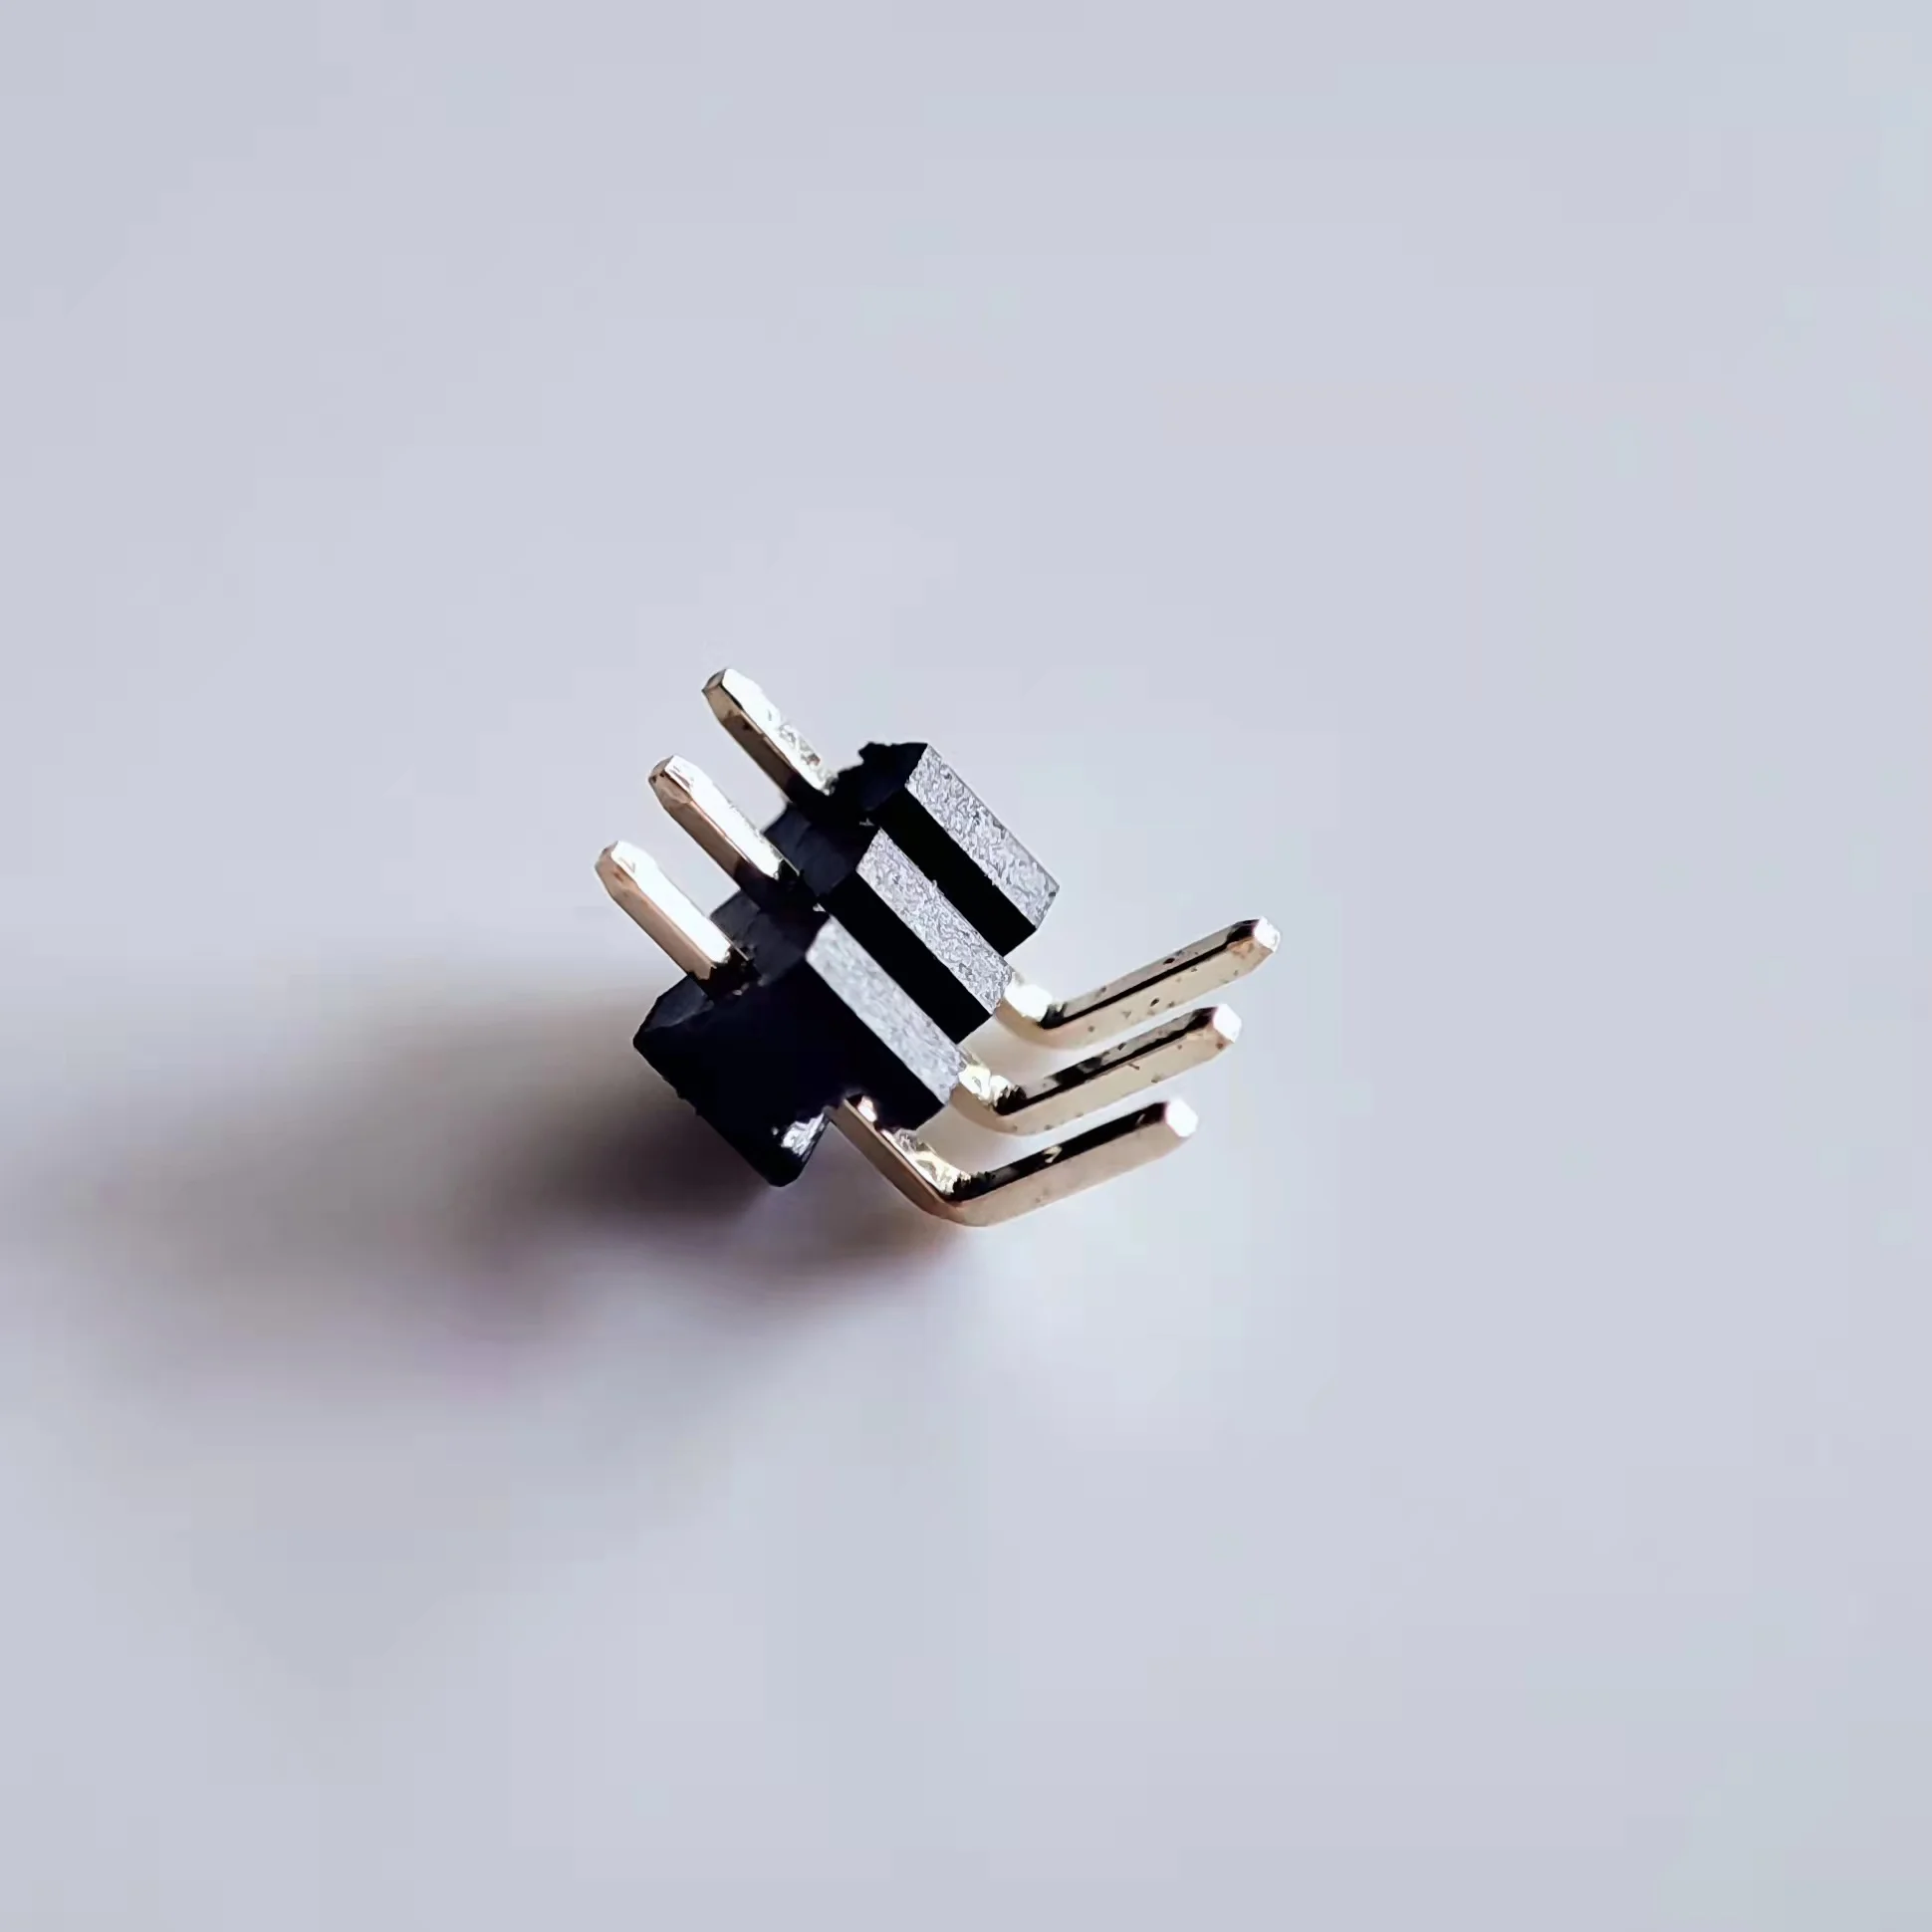 pin header 1.27mm pitch right angle type single row 1 to 50 pins PCB connector